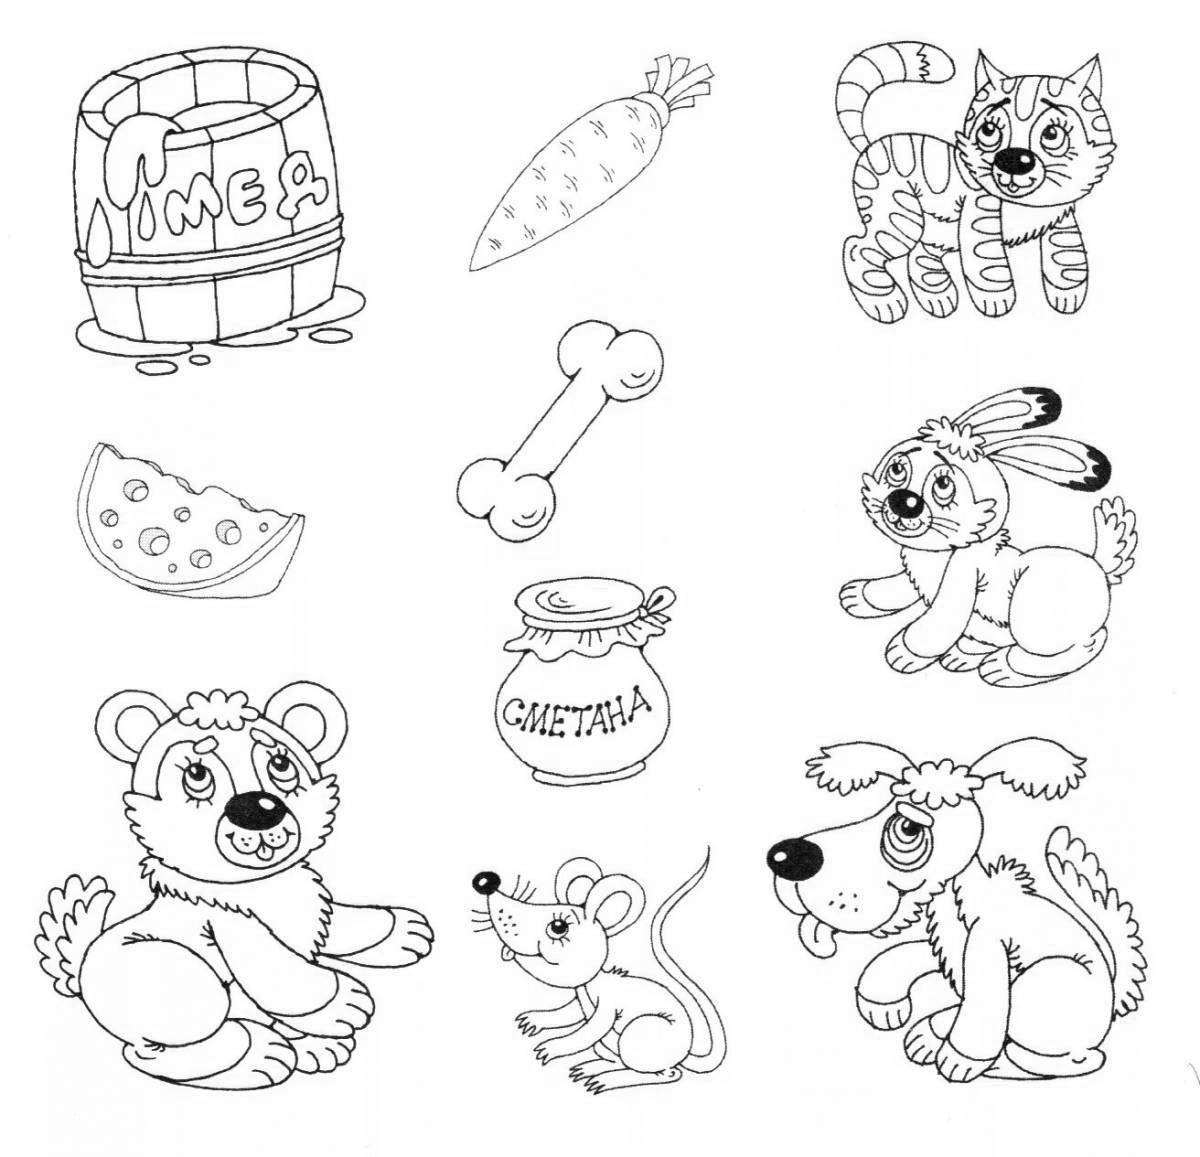 Stimulating coloring book for children 4 years old, educational